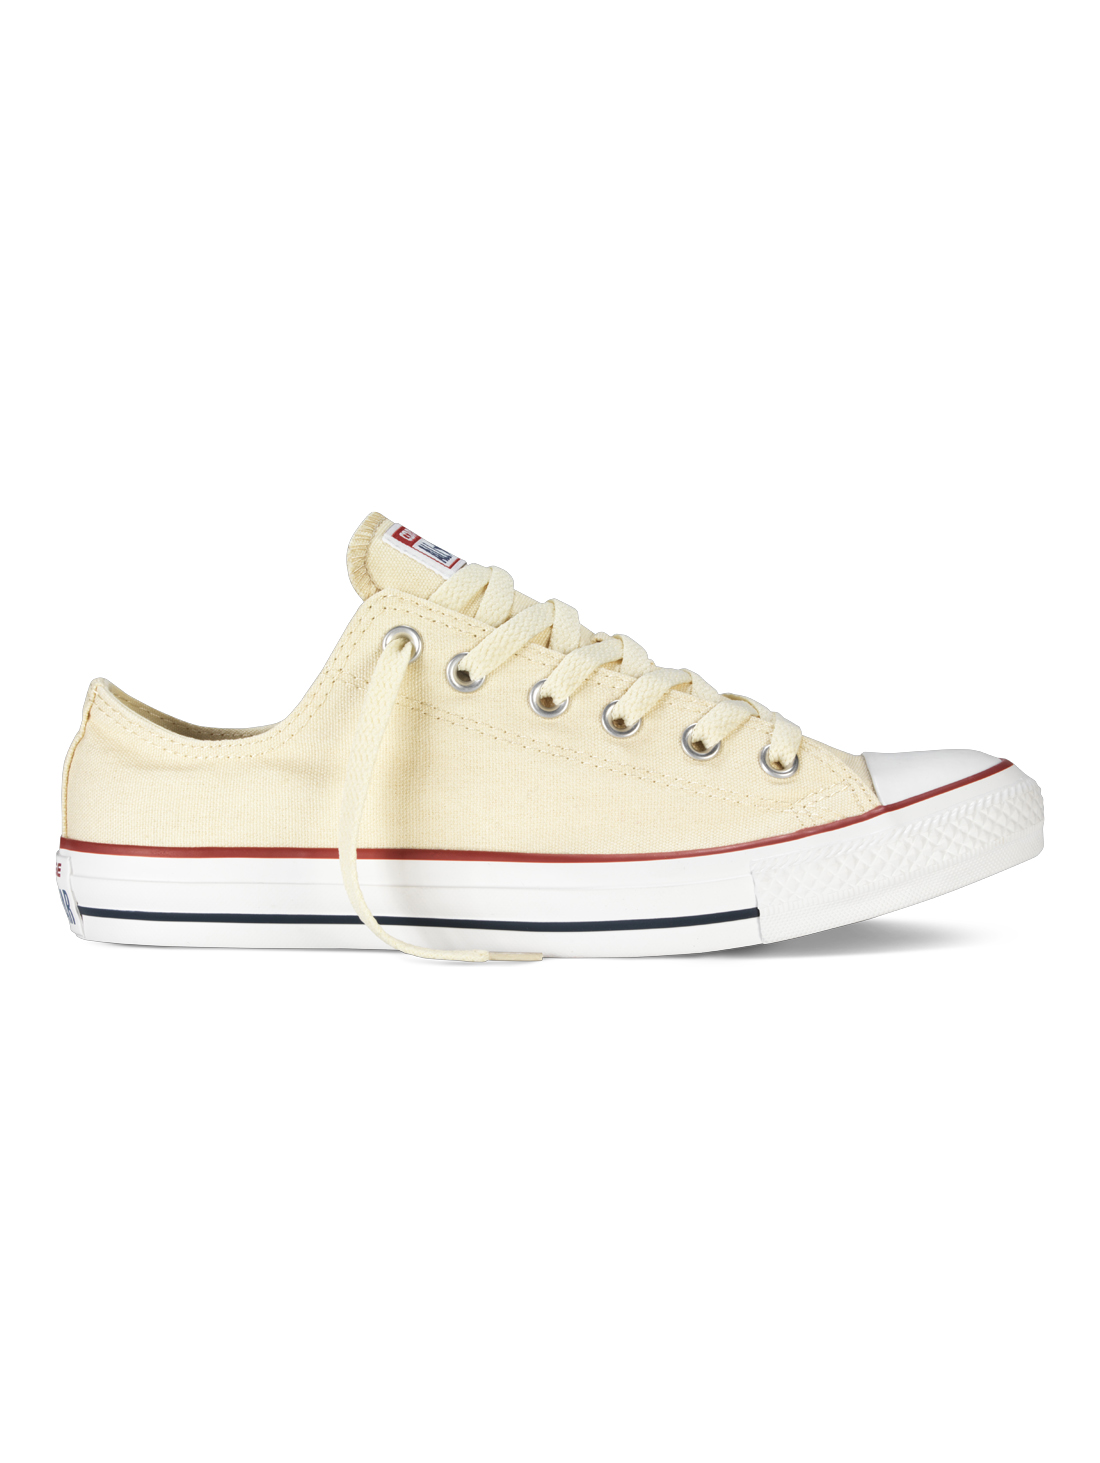 Converse All Star OX - Natural White 